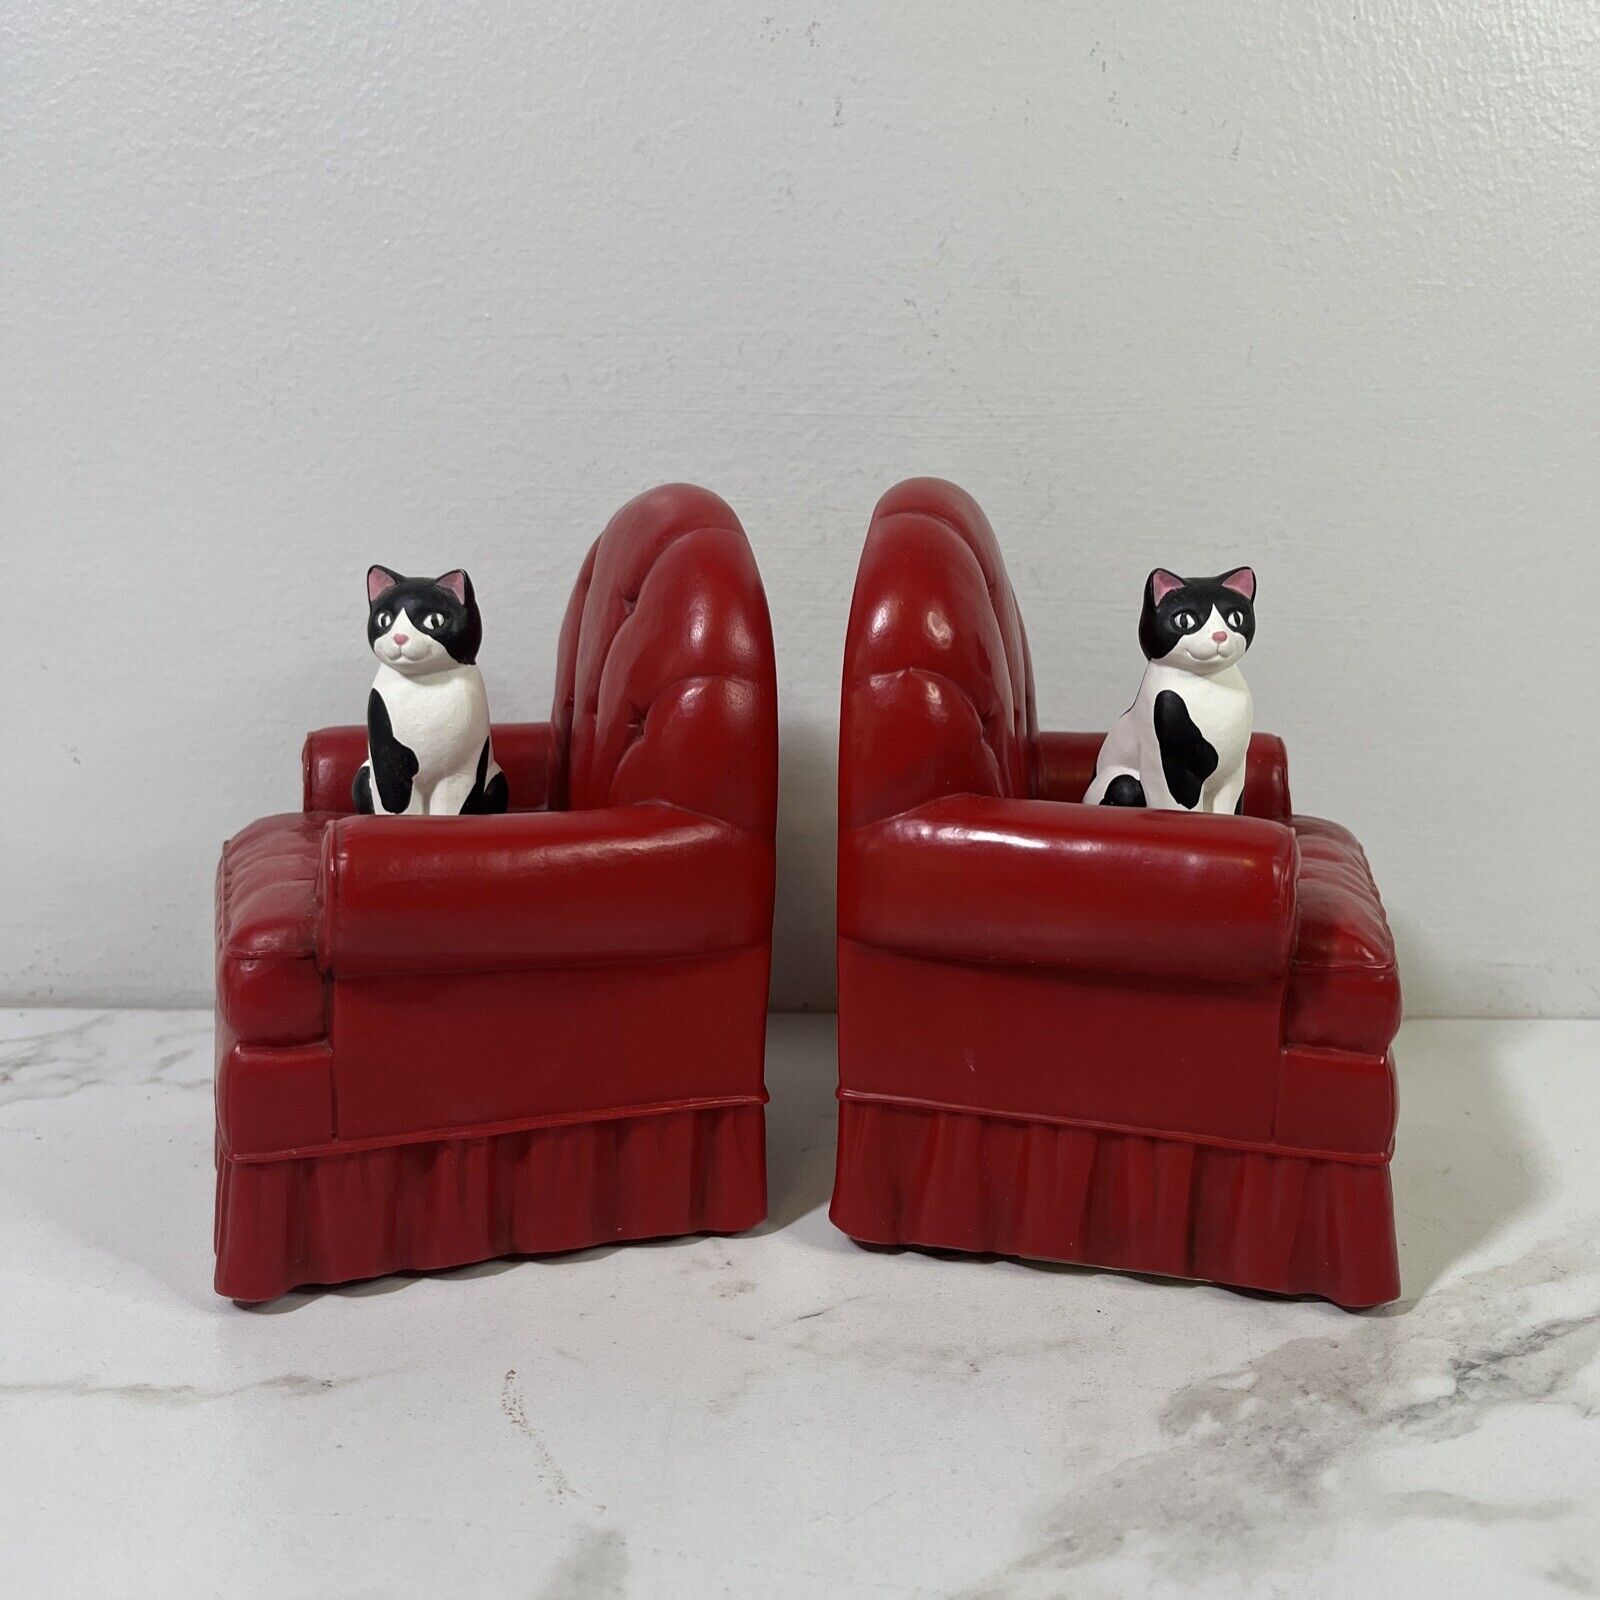 Vintage 1989 Hallmark Cards Bookends Cats Cat Couch Red Chair Black Collectible